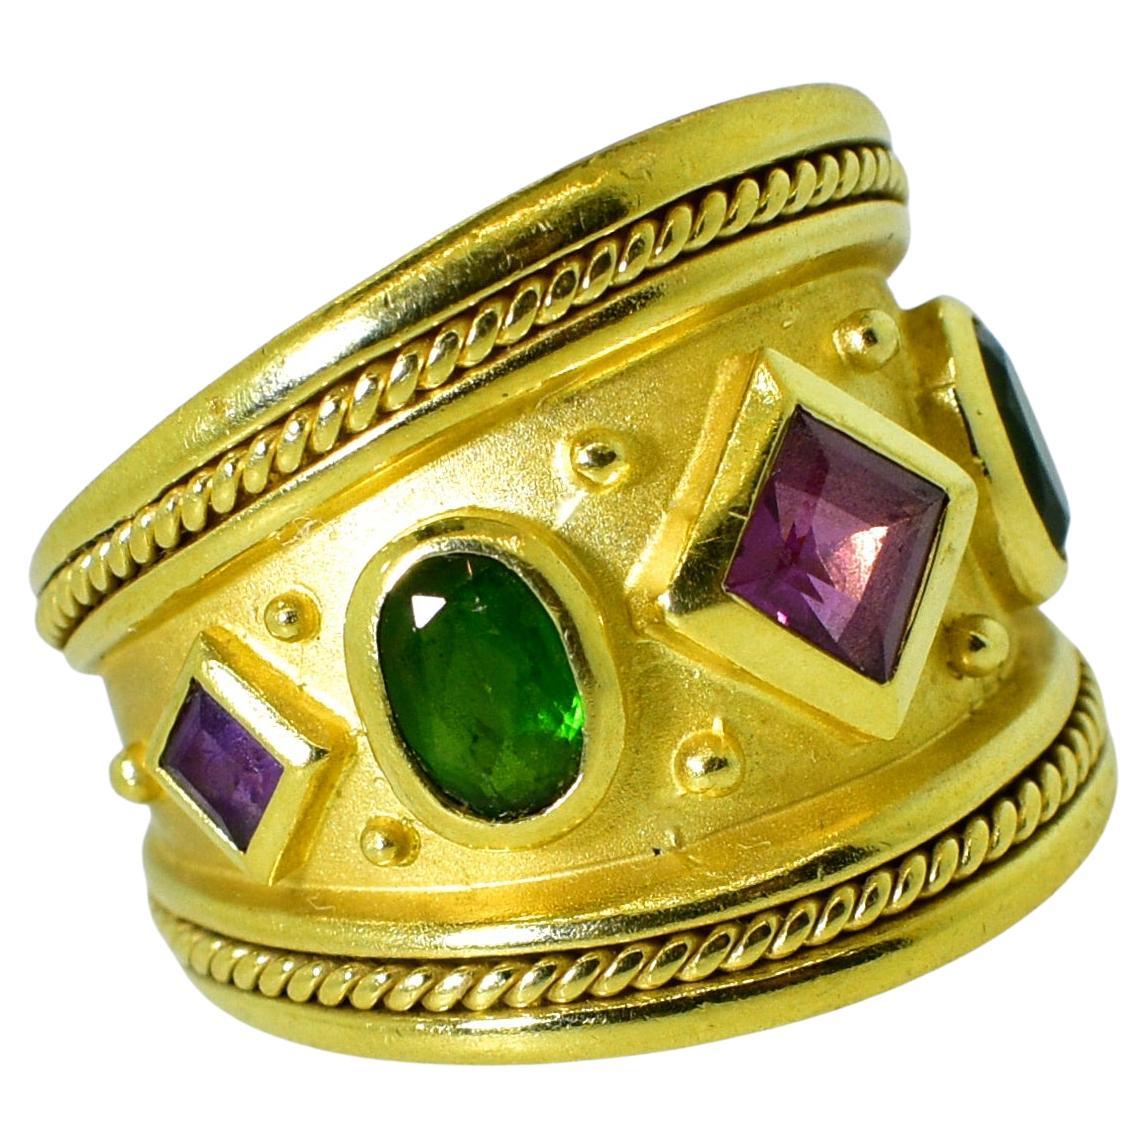 18K gold possessing 3 square cut  bright pink tourmaline and two oval bright green tourmaline.  This well made modern ring is a size 8.5.  The 3 square natural  pink tourmalines and the 2 bright green natural tourmalines weigh approximately 2.0 cts.